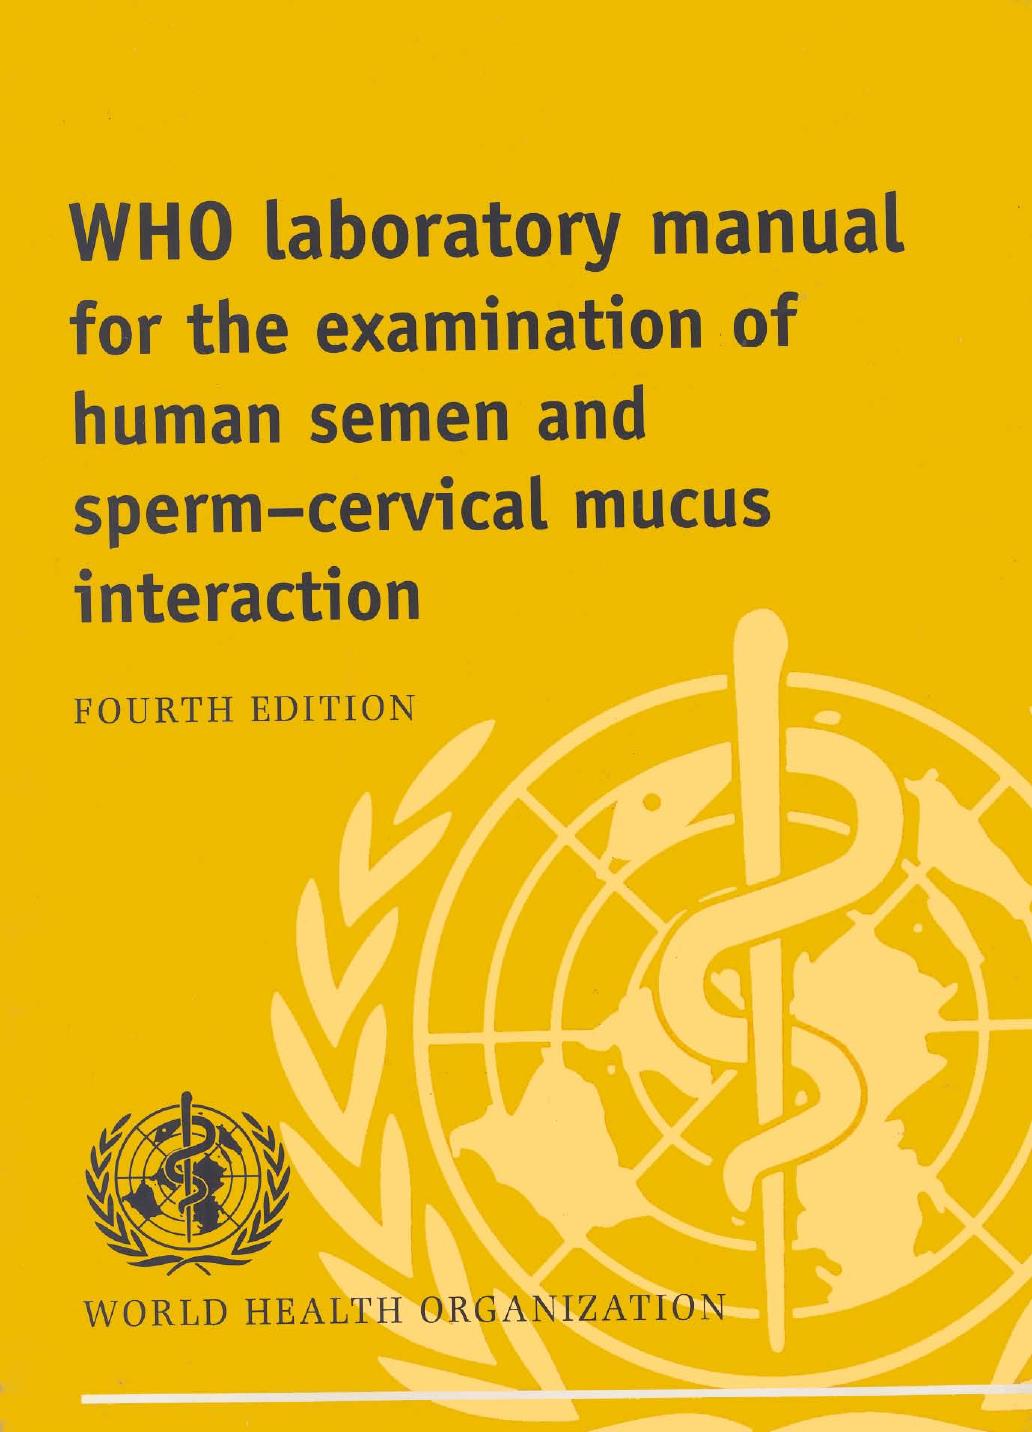 WHO laboratory manual for the examination of human semen and semen-cervical mucus interaction 1999